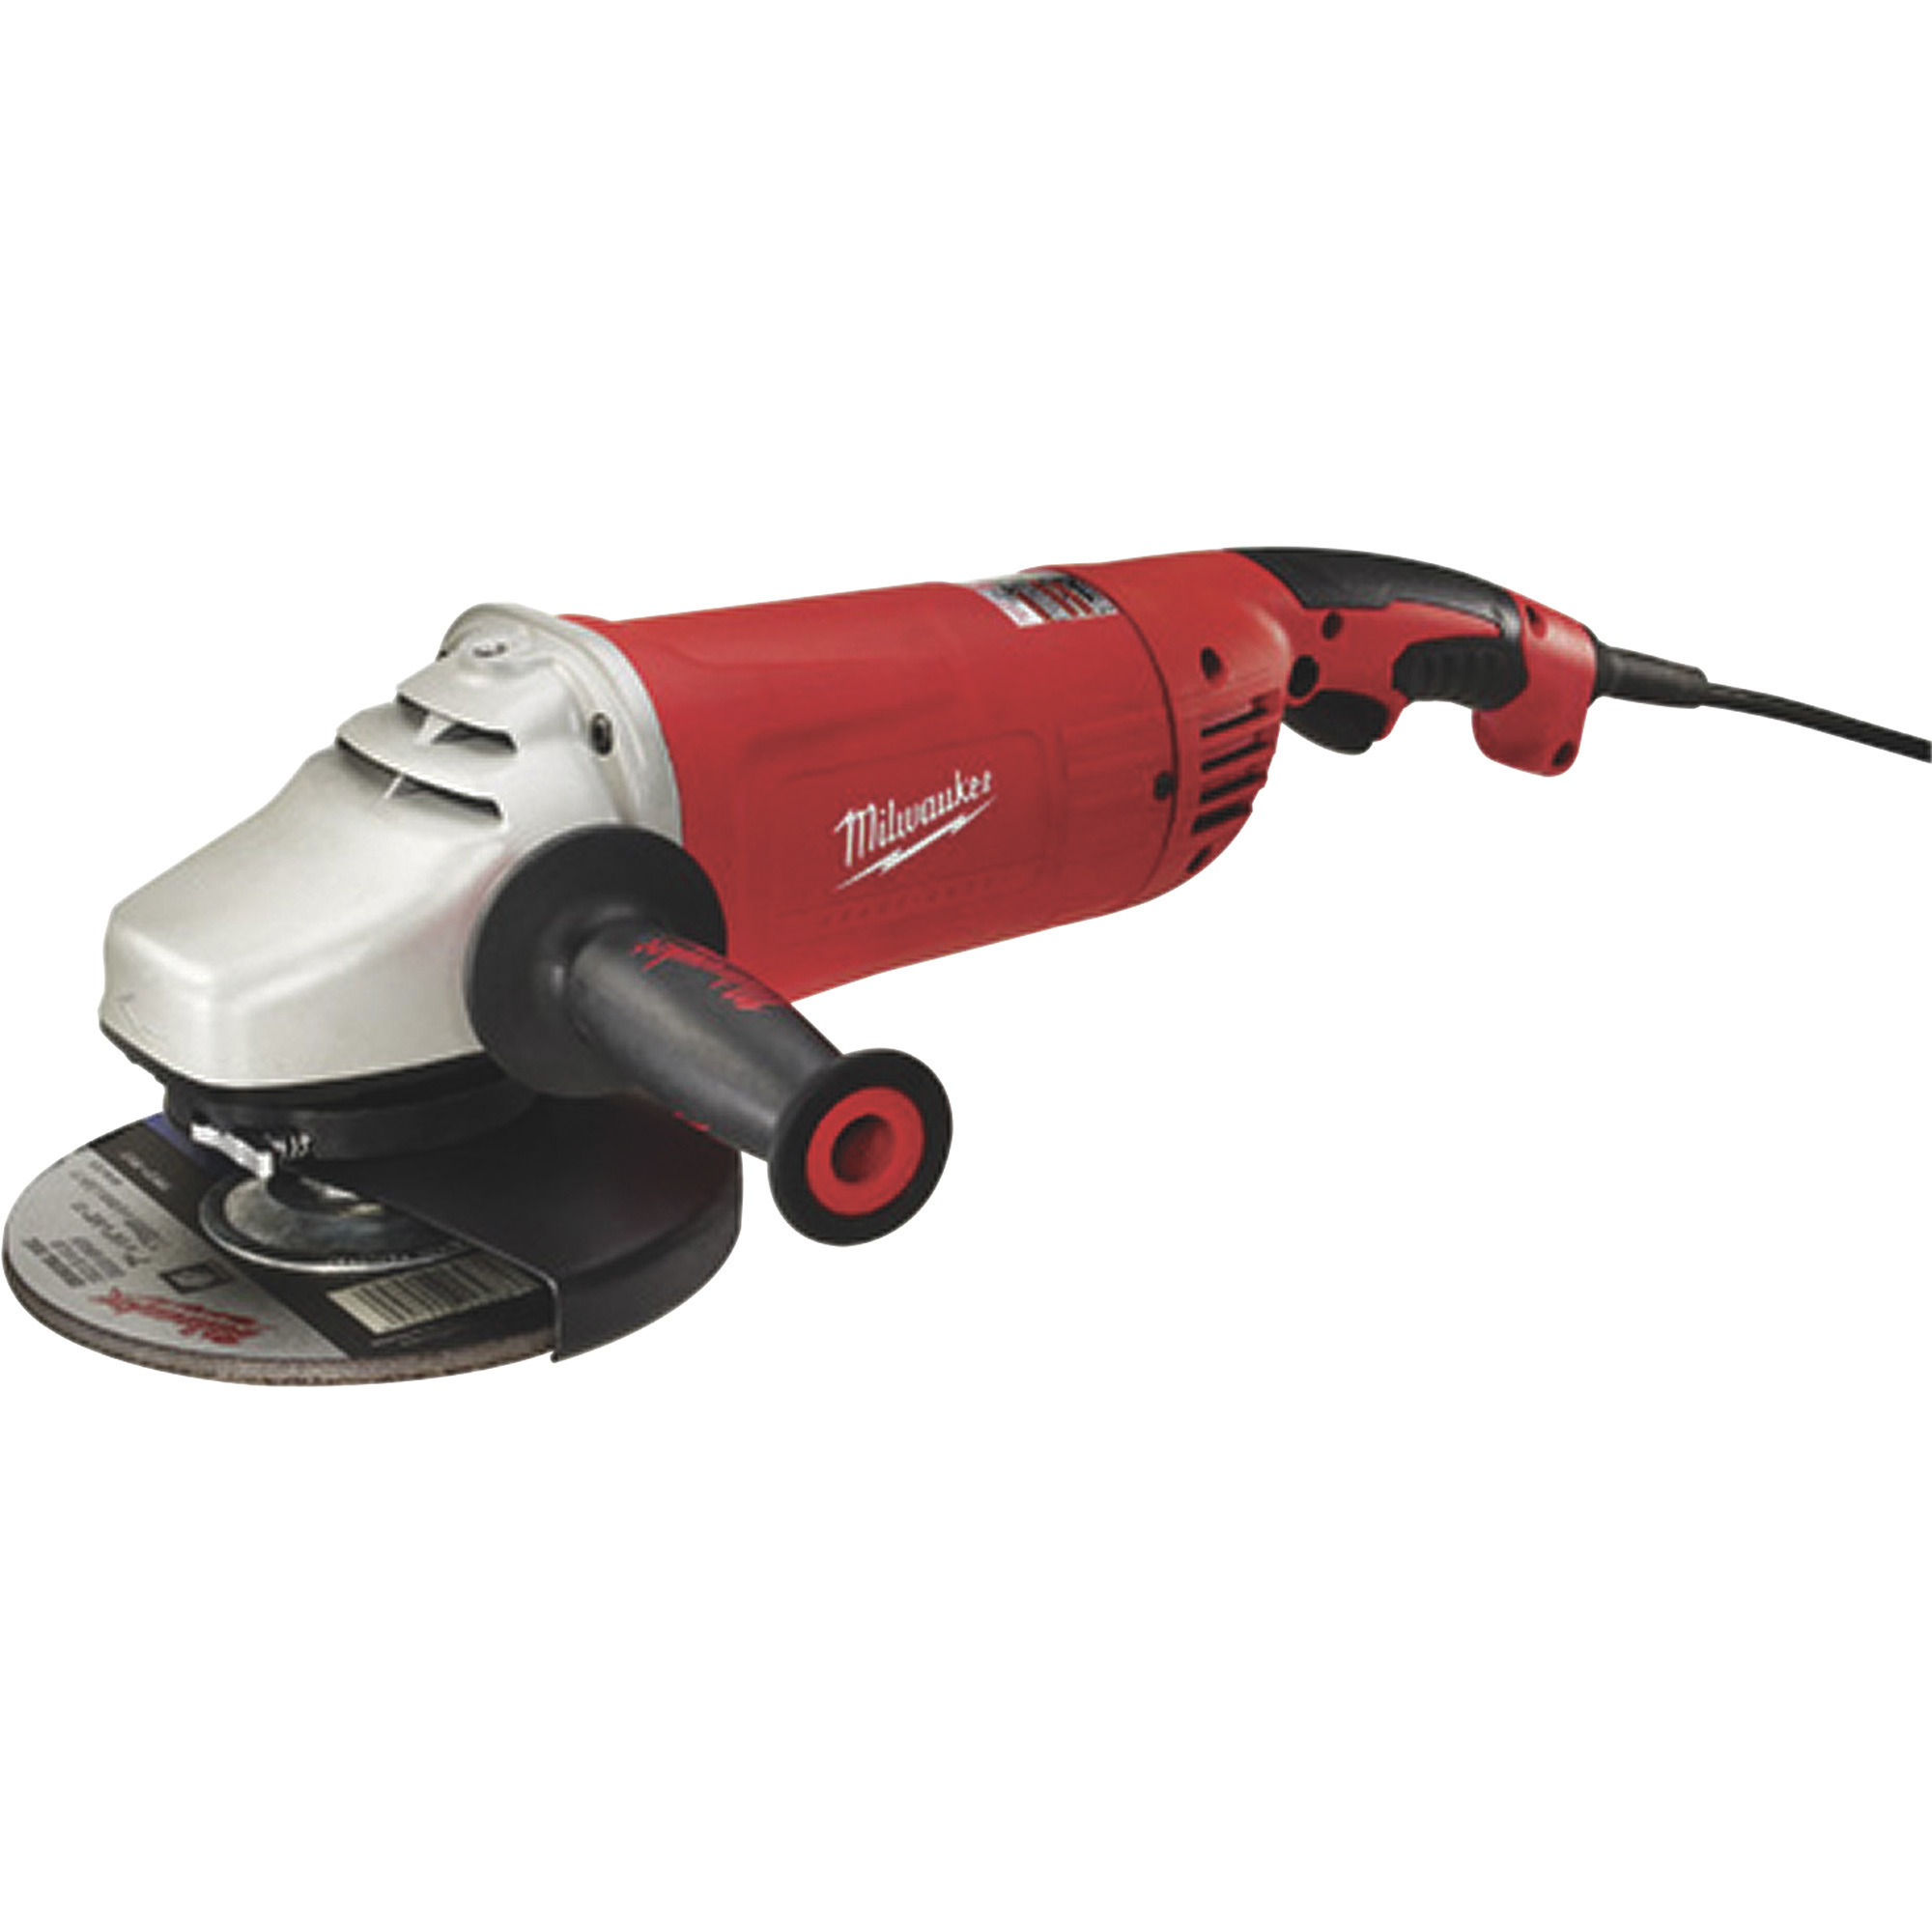 Milwaukee 7Inch or 9Inch Grinder, 15 Amp, 6000 RPM, Model 6088-30